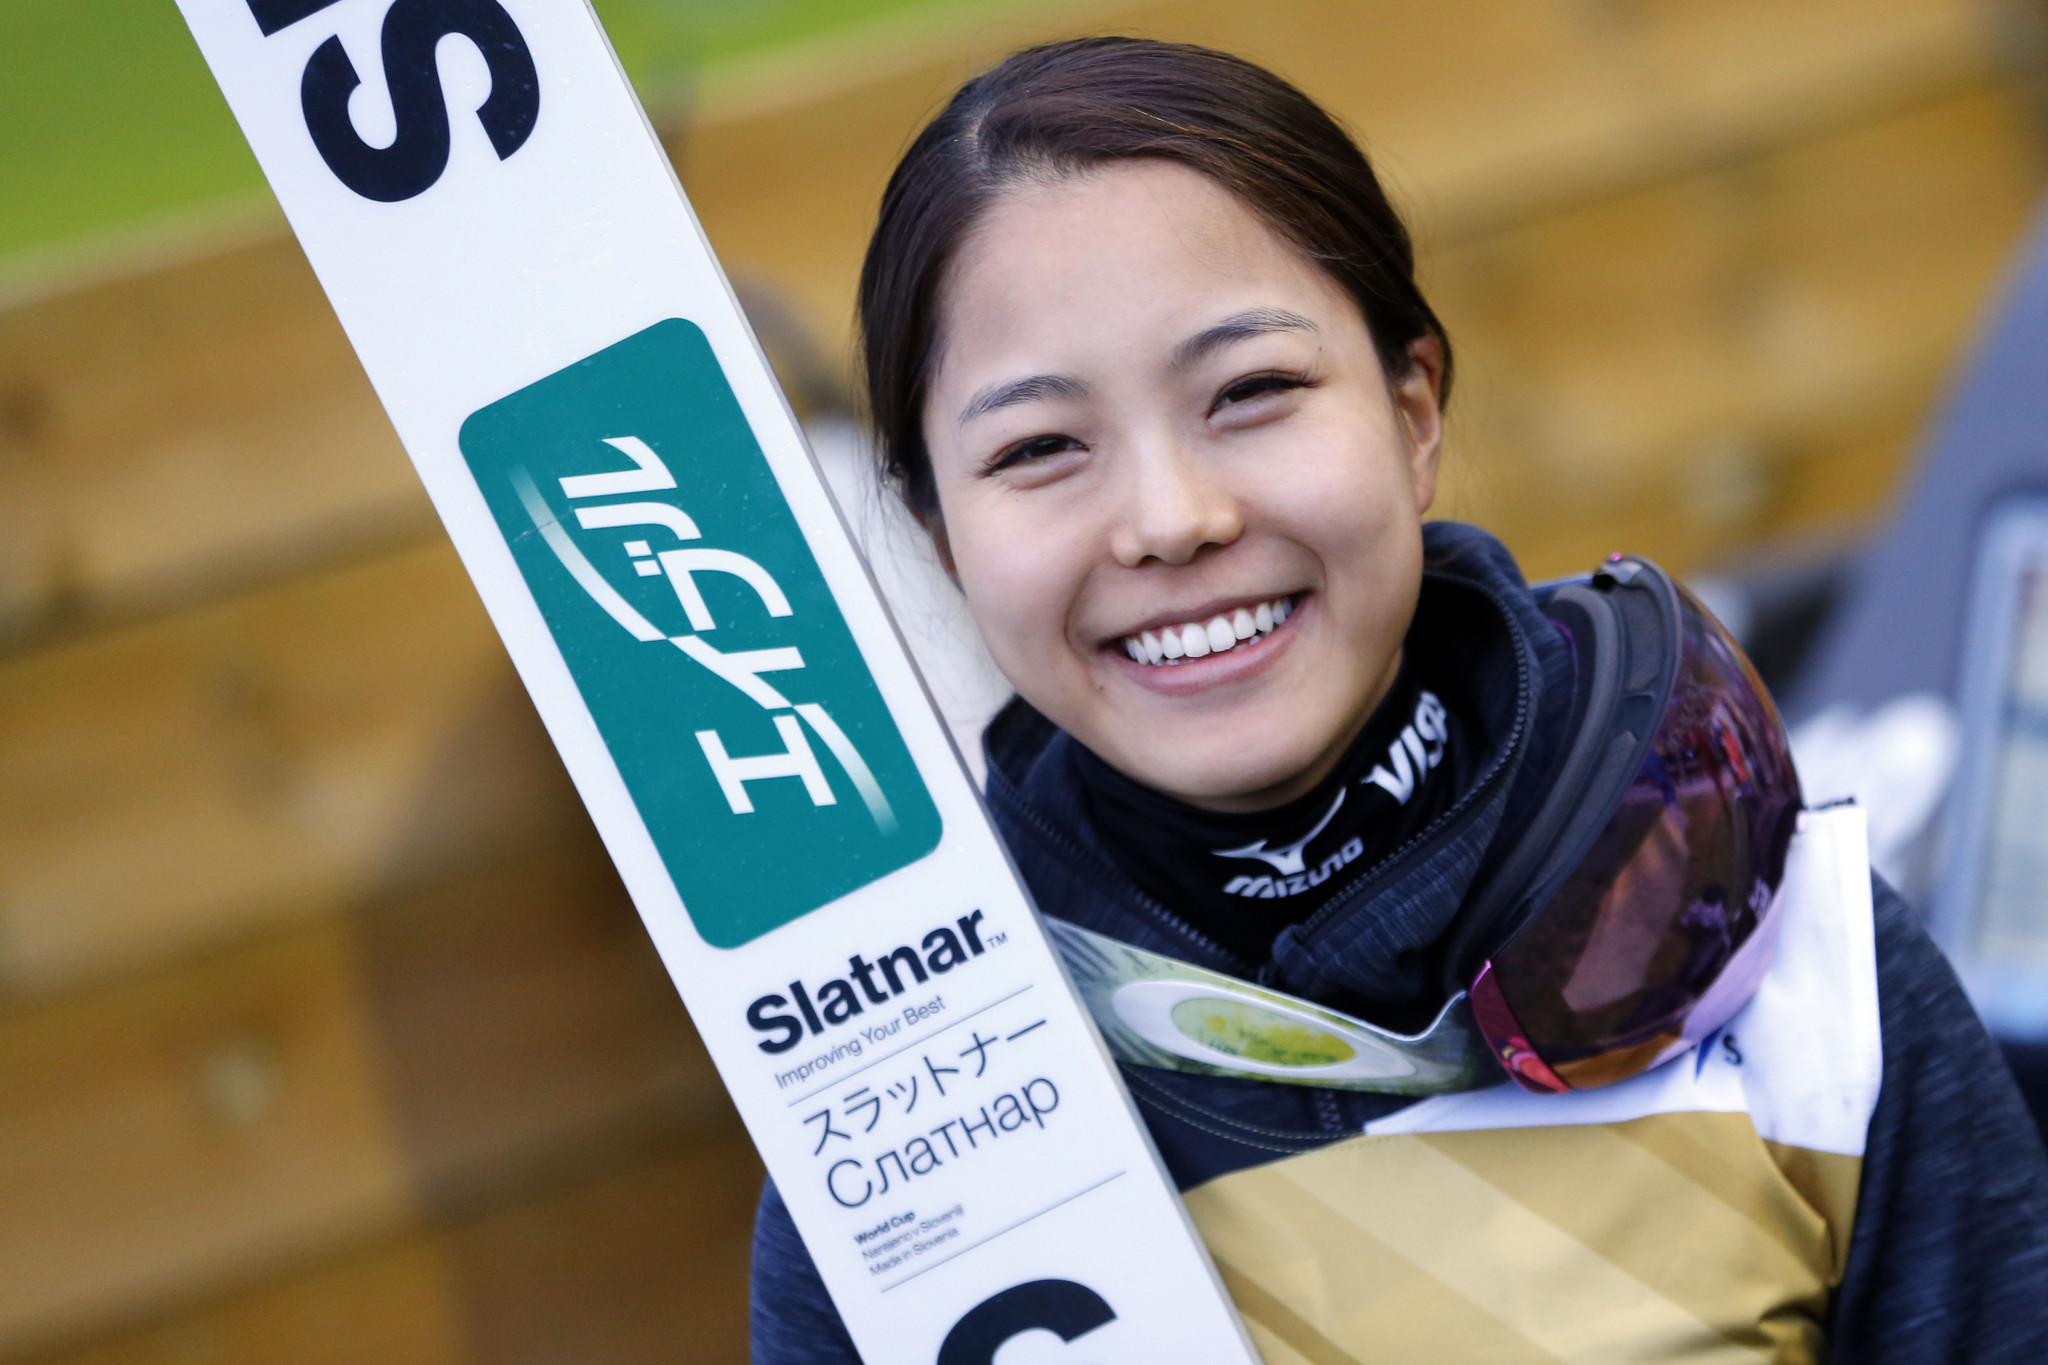 Sara Takanashi, of Japan, is in form after qualifying for the final of the Ski Jump World Cup event in Lillehammer ©Getty Images